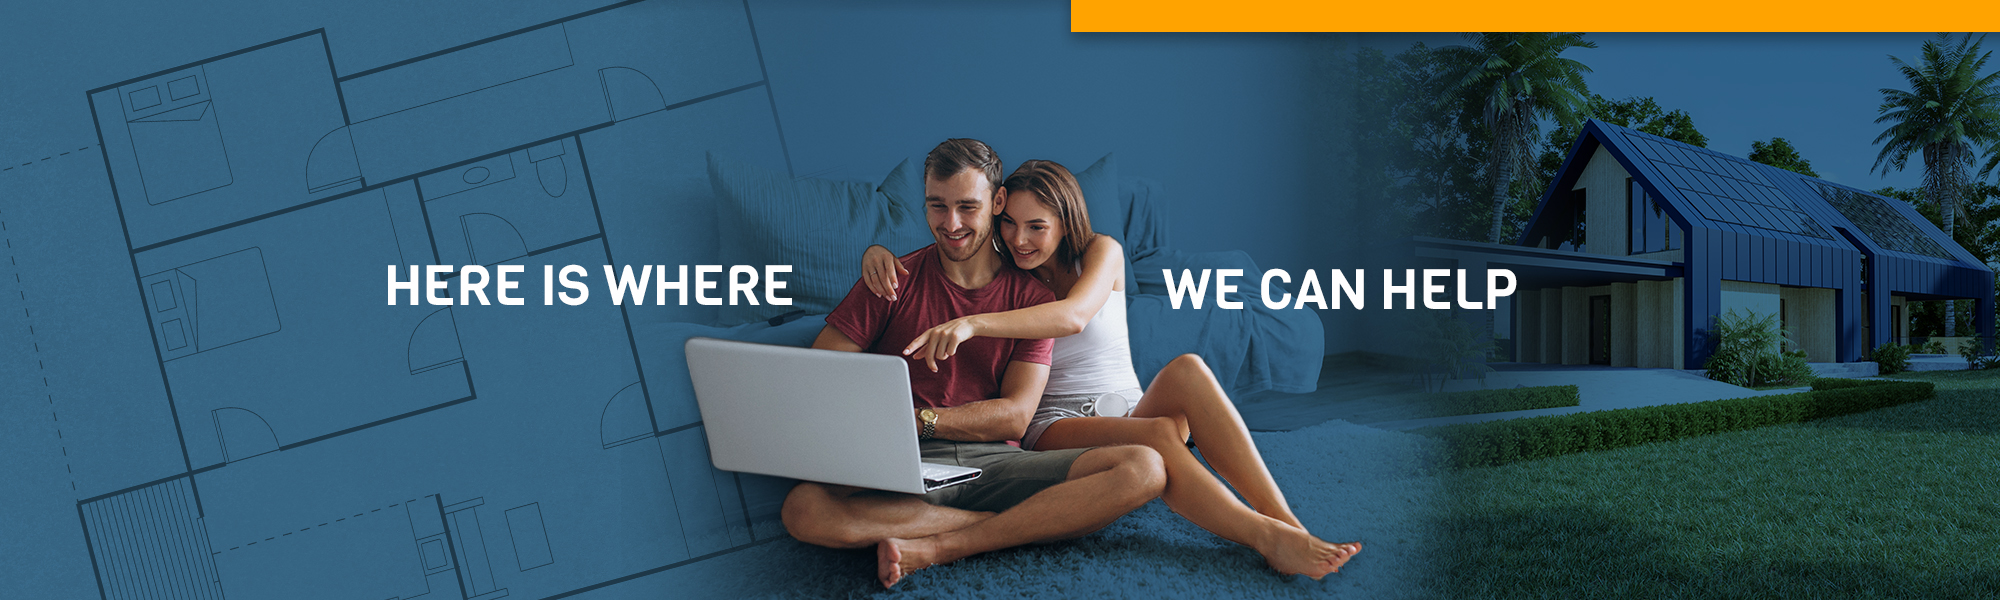 Here is where we can help. (Image of couple at home together sitting on floor with computer.)